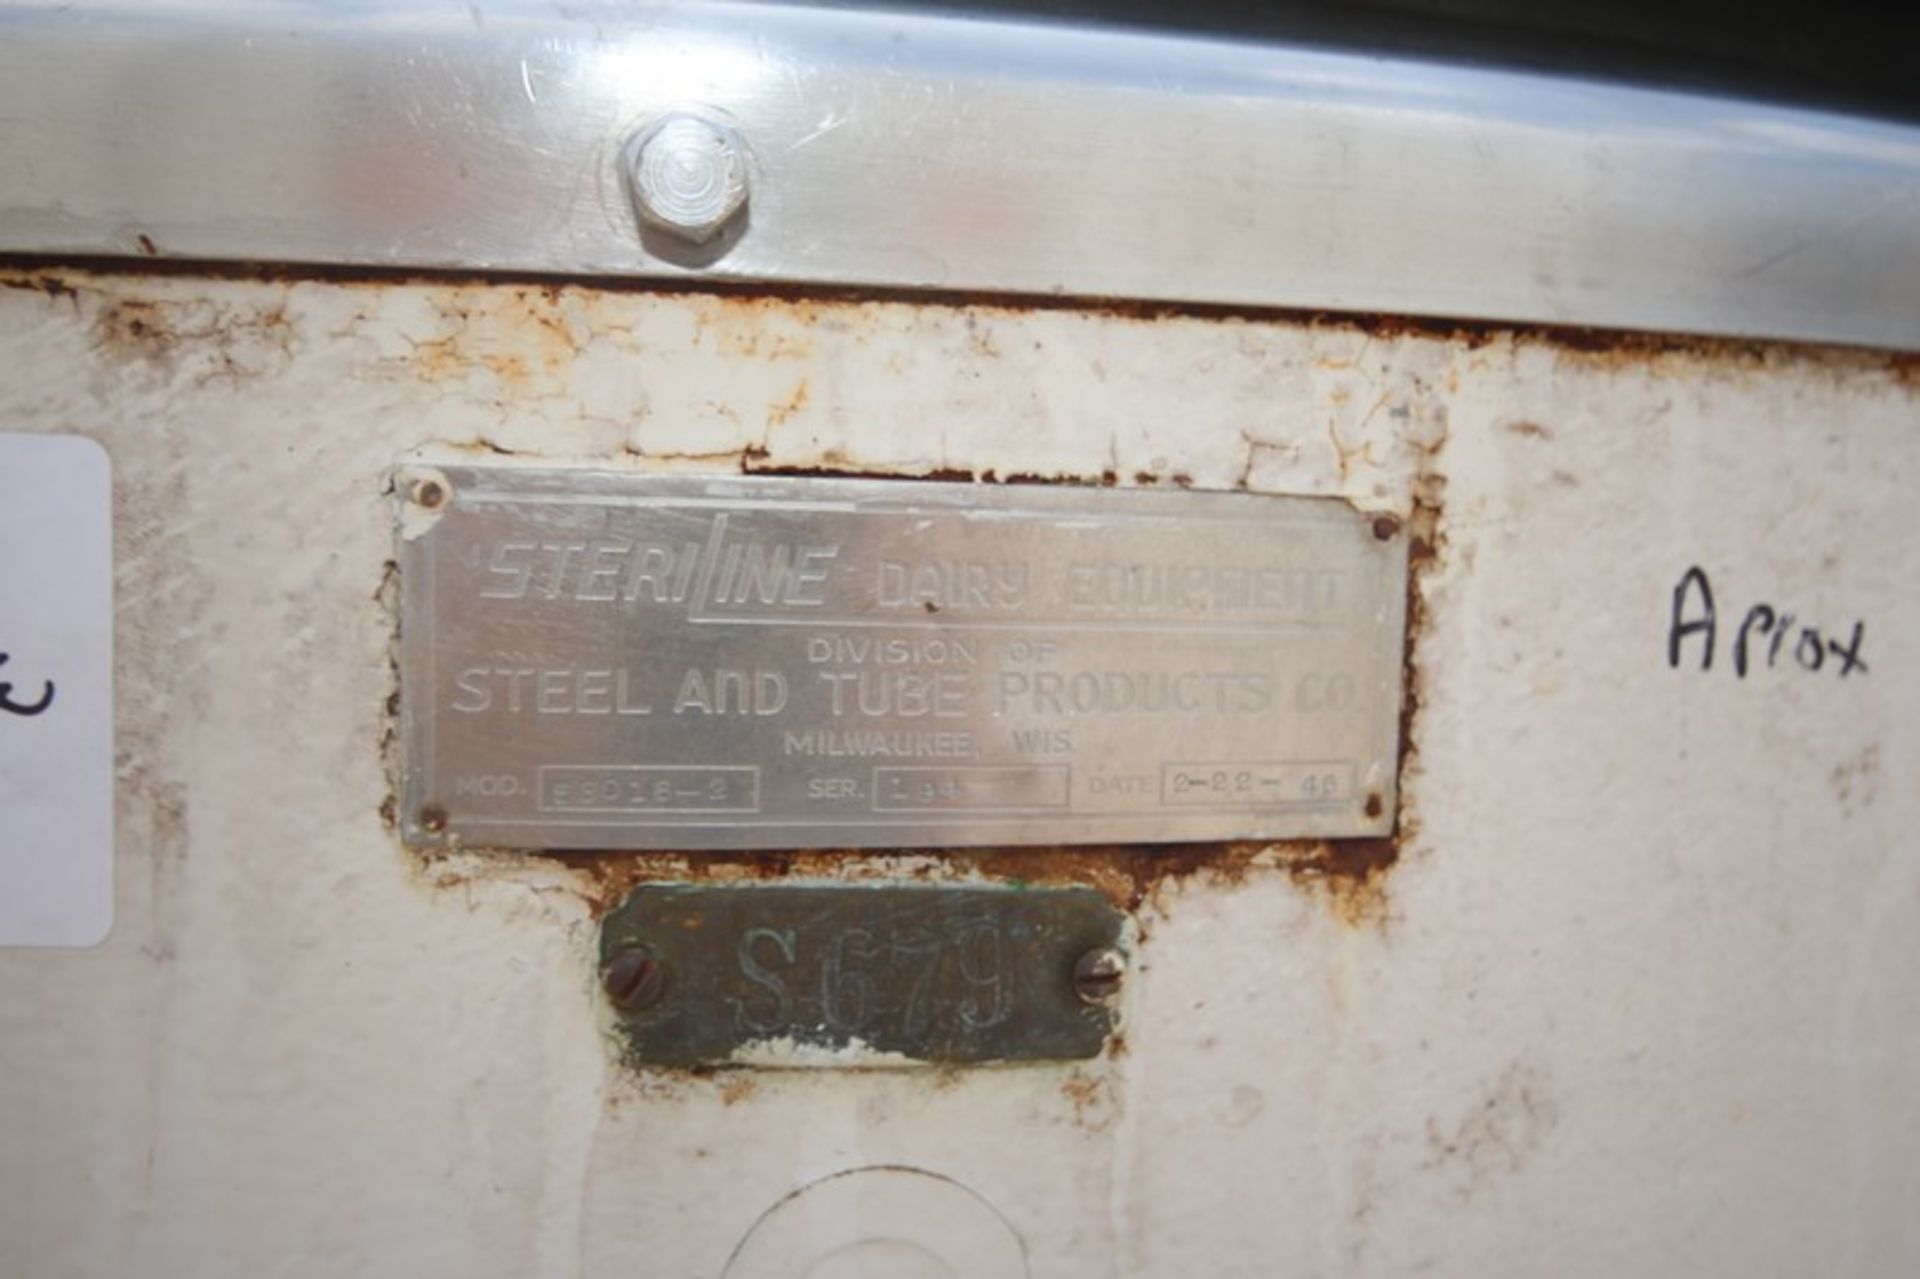 Steriline Aprox. 300 Gallon Hinged Lid, Jacketed S/S Tank, Model 53016-2, SN 194, Painted Exterior, - Image 7 of 7